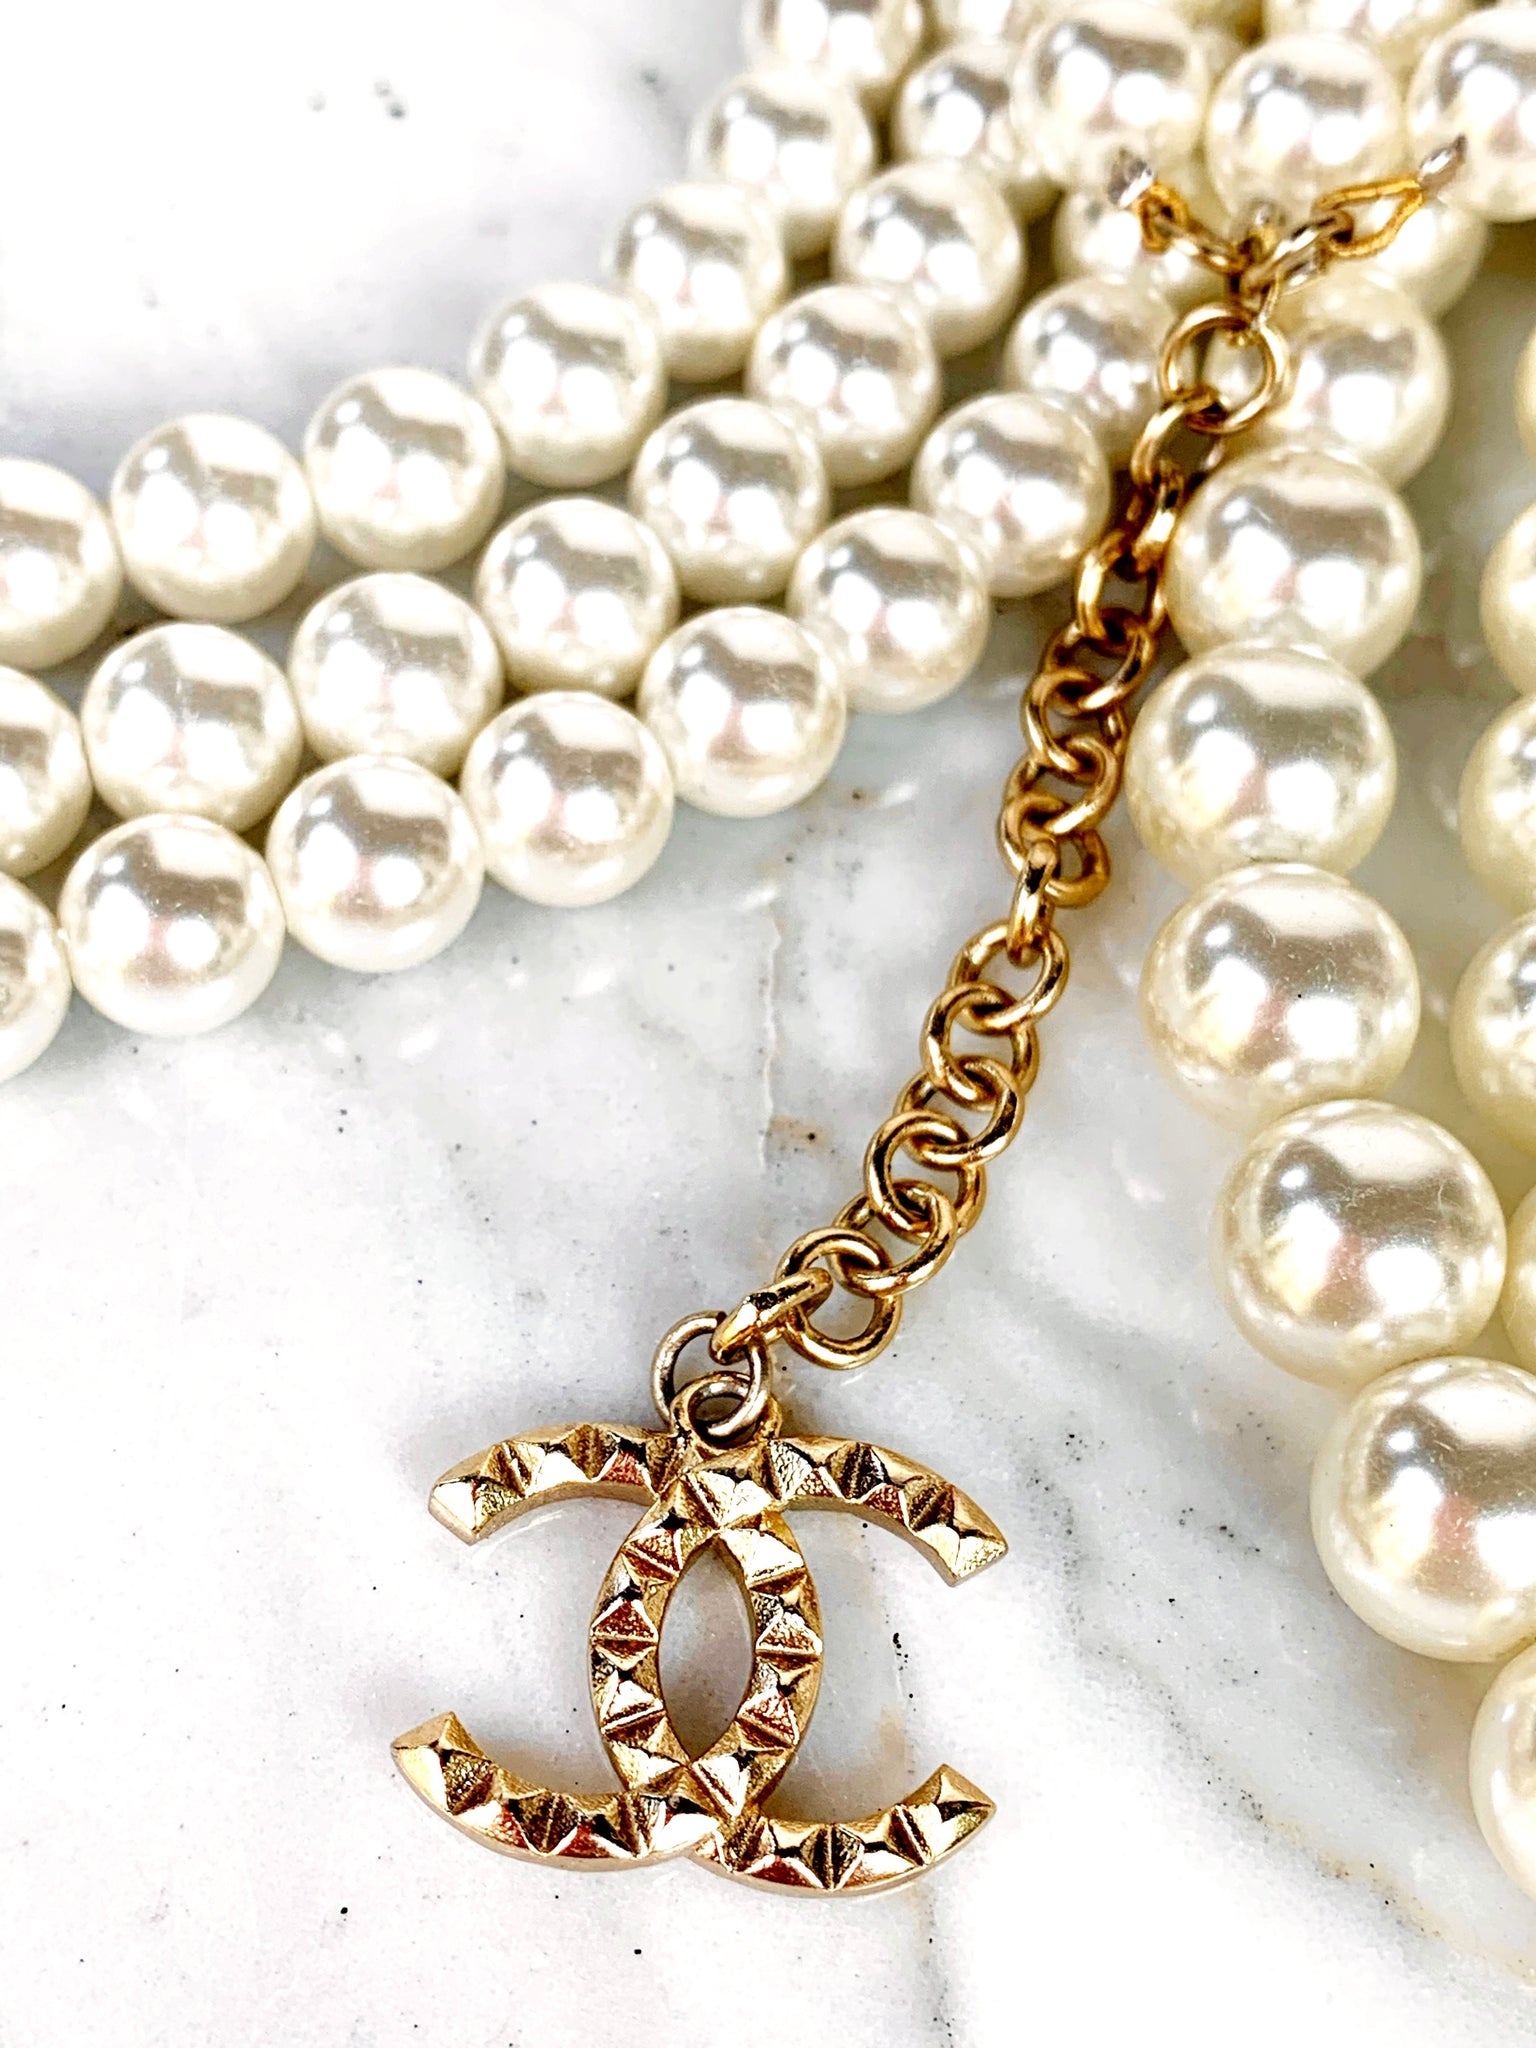 Chanel Gold Plated Pearl Sautoir Necklace